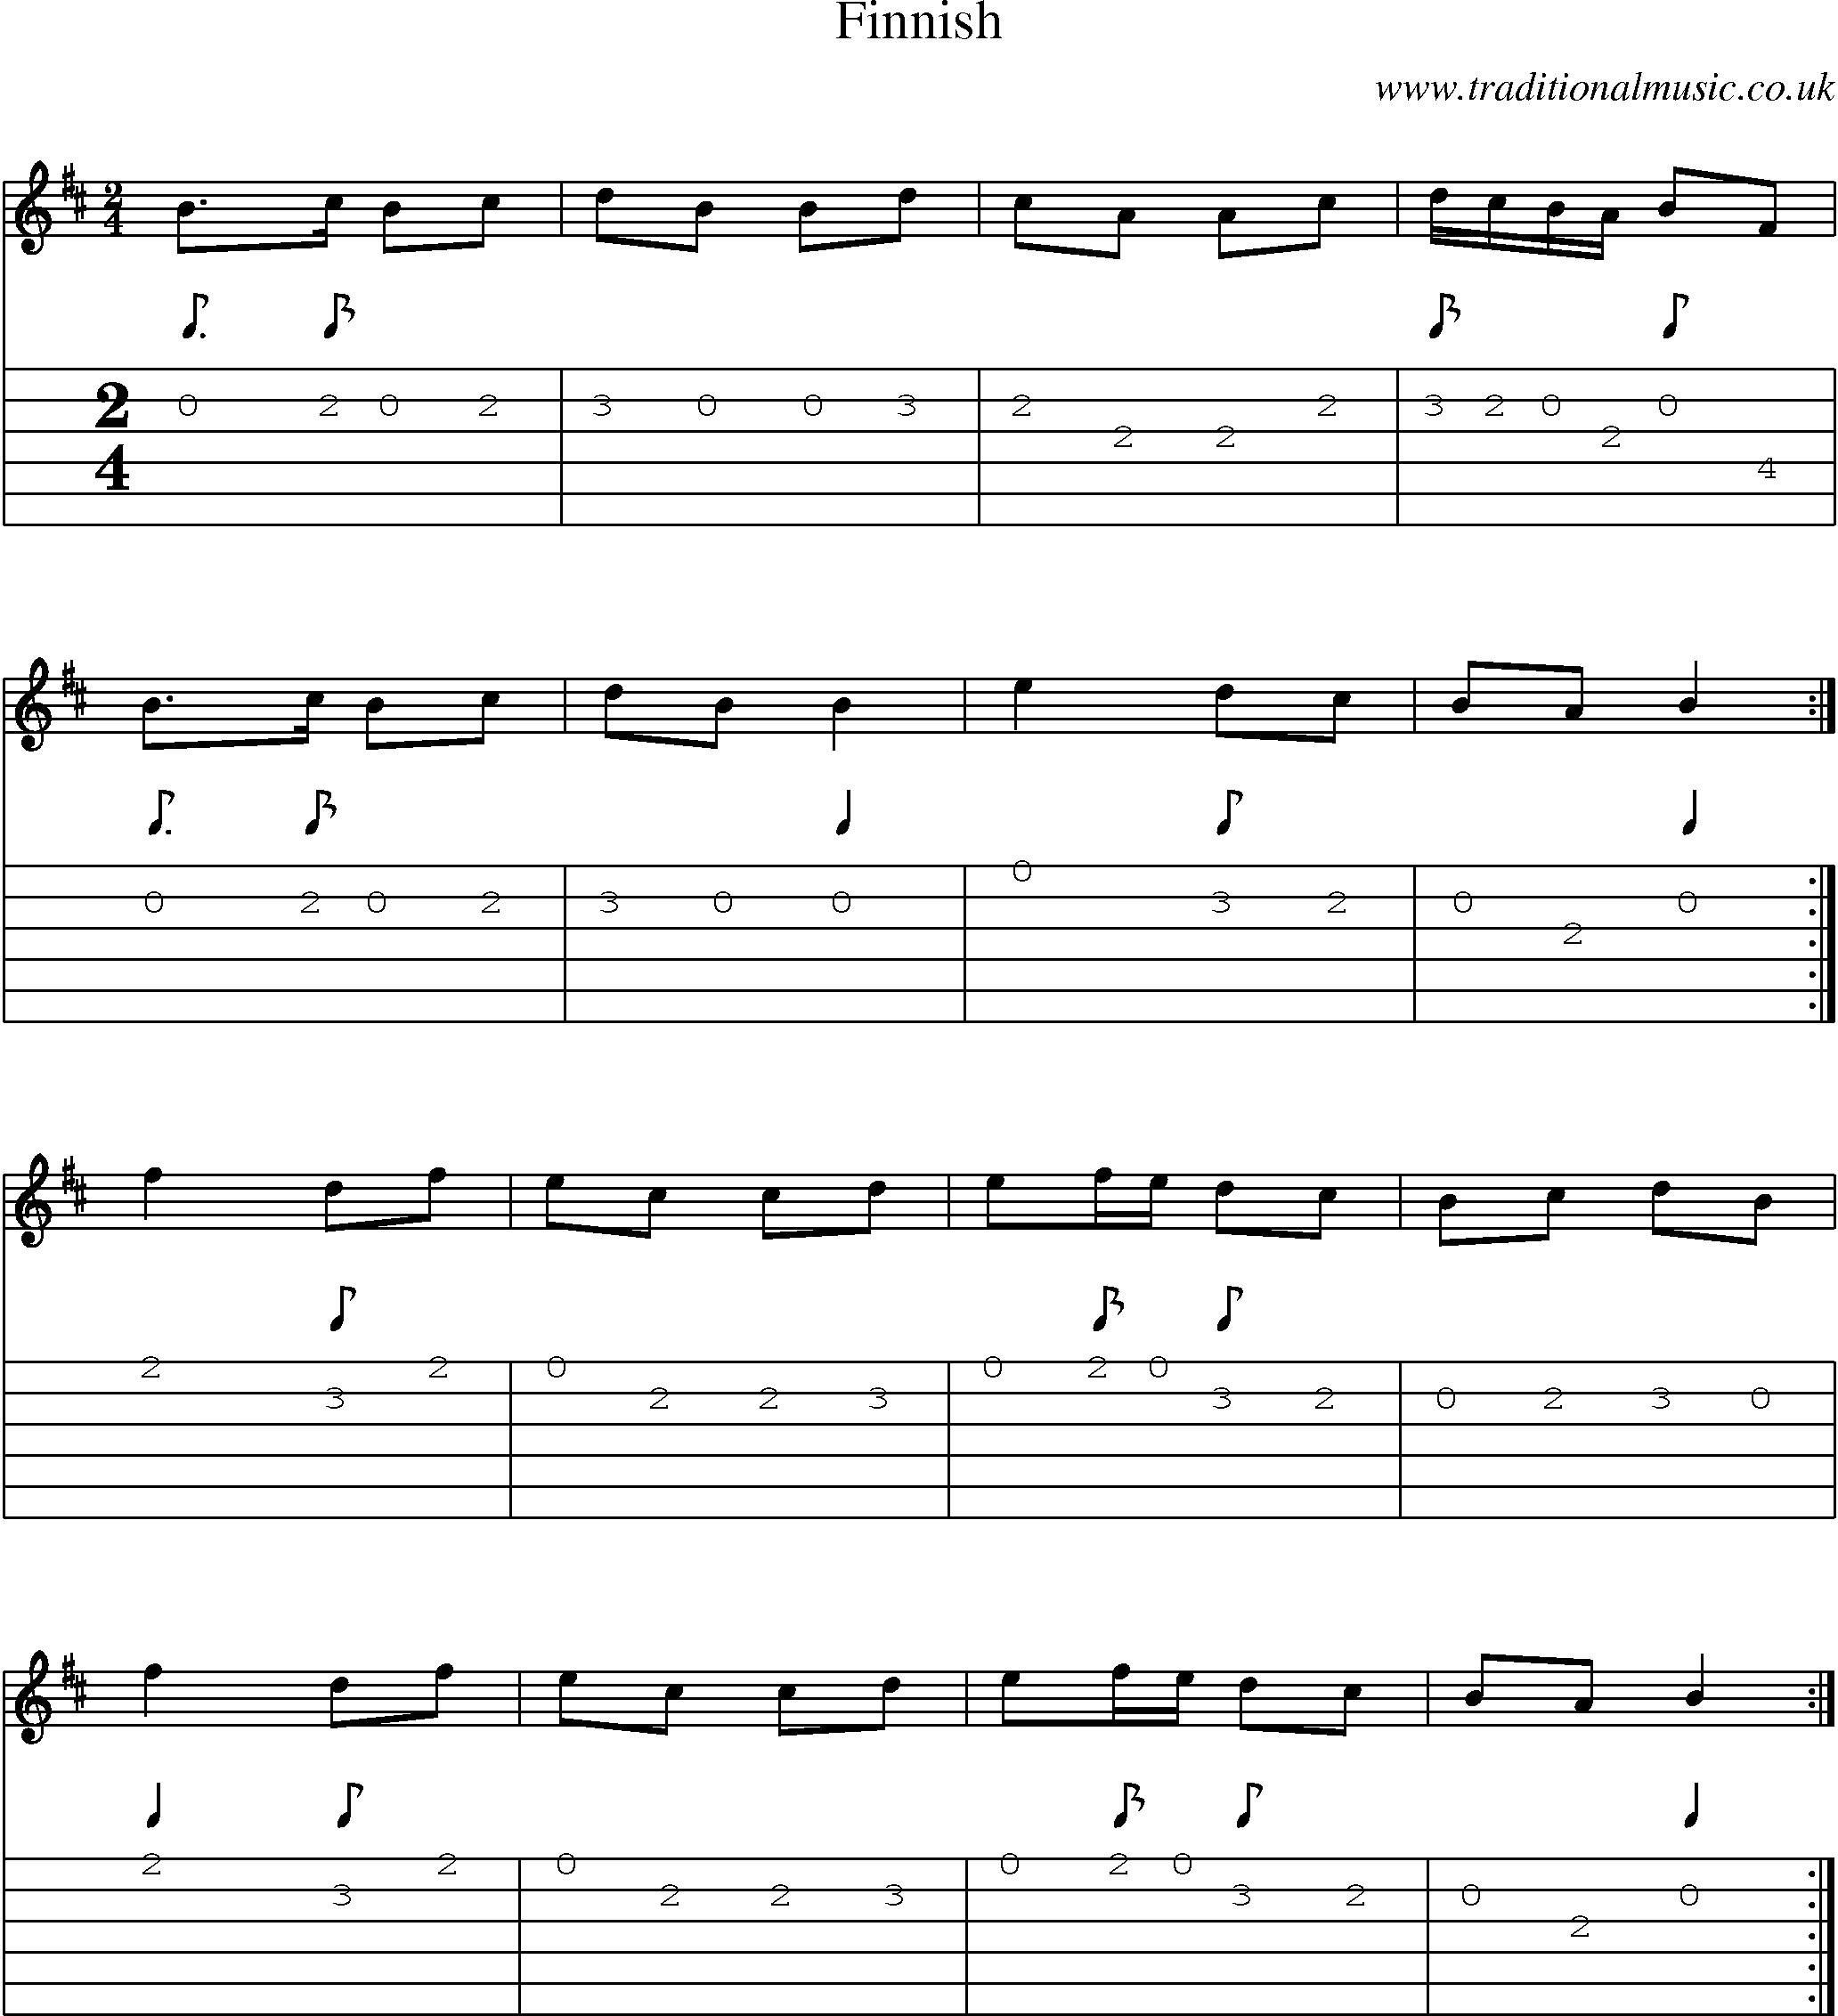 Music Score and Guitar Tabs for Finnish